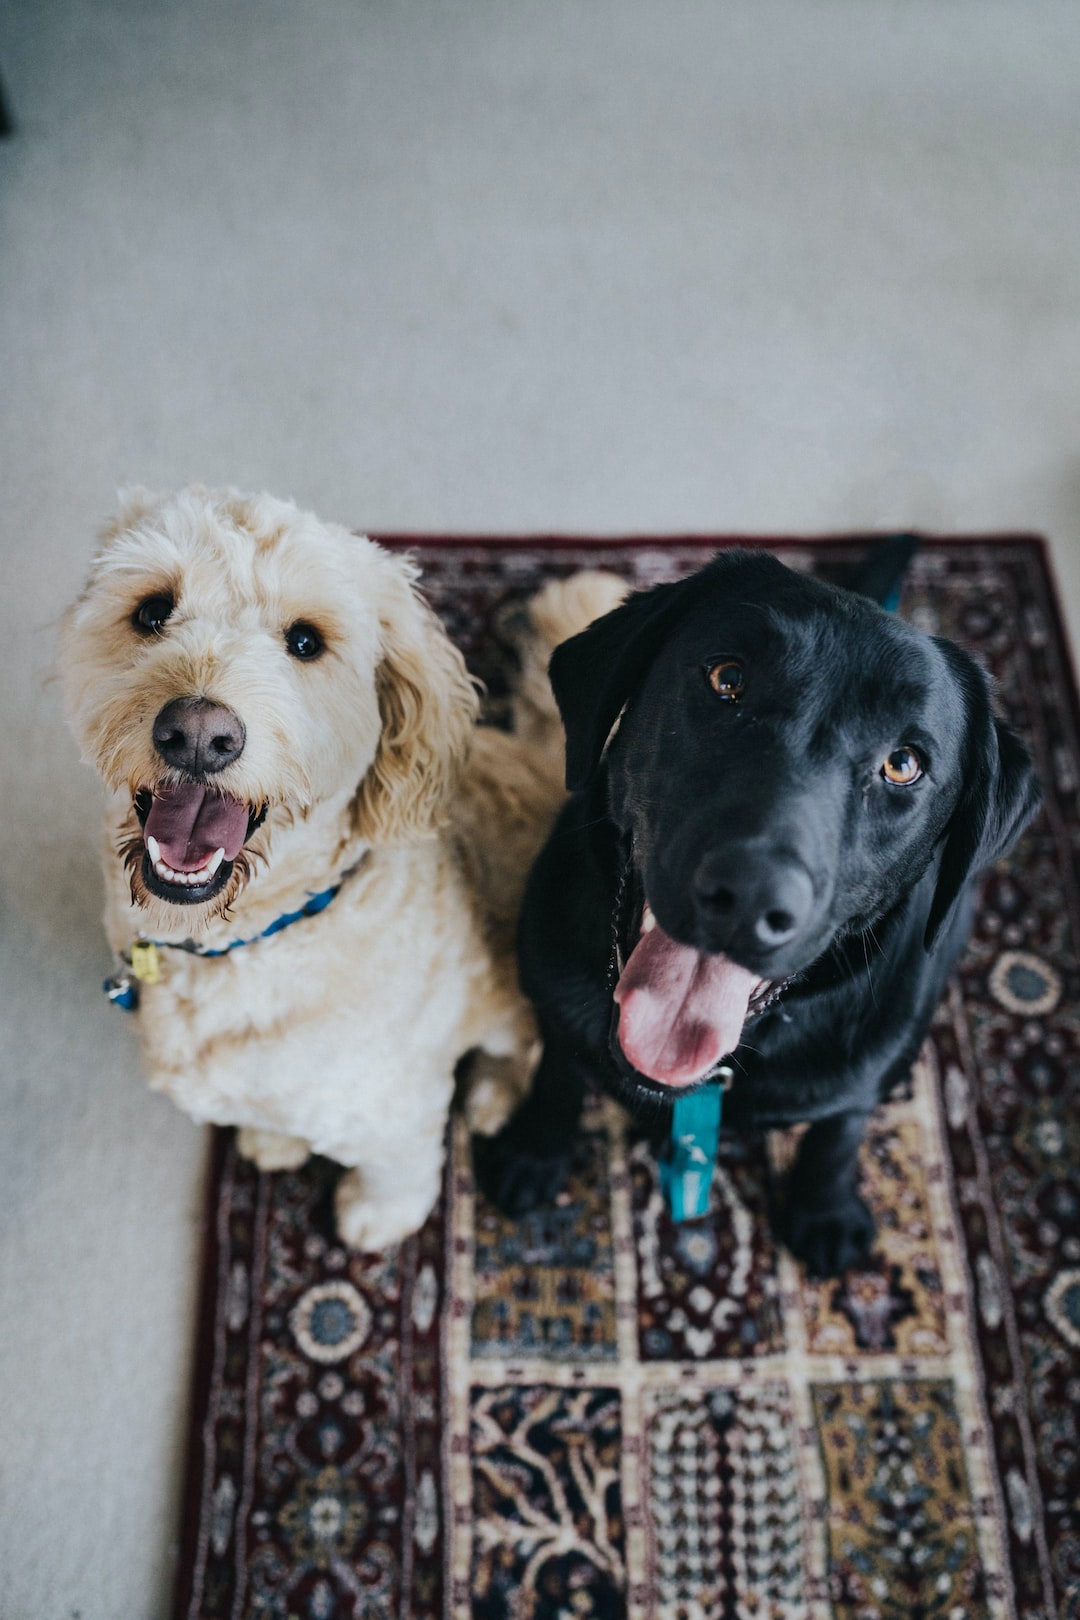 Allowing Pets in a Rental Property: 5 Things To Consider Beforehand